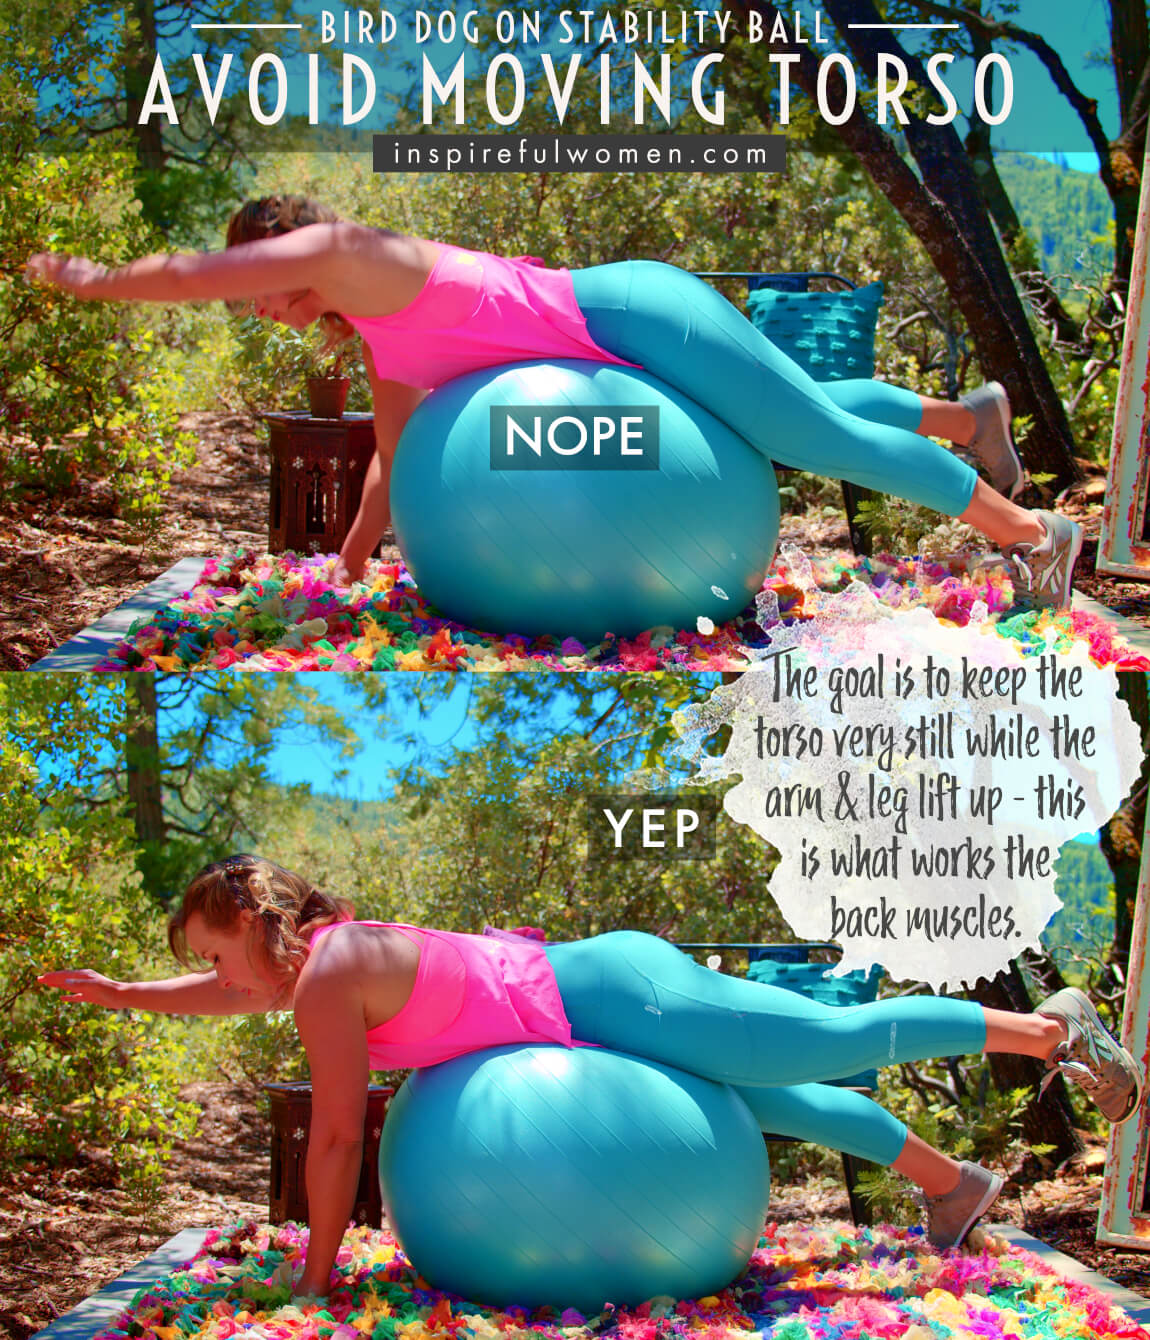 avoid-moving-torso-stability-ball-supported-bird-dog-home-core-workout-proper-form